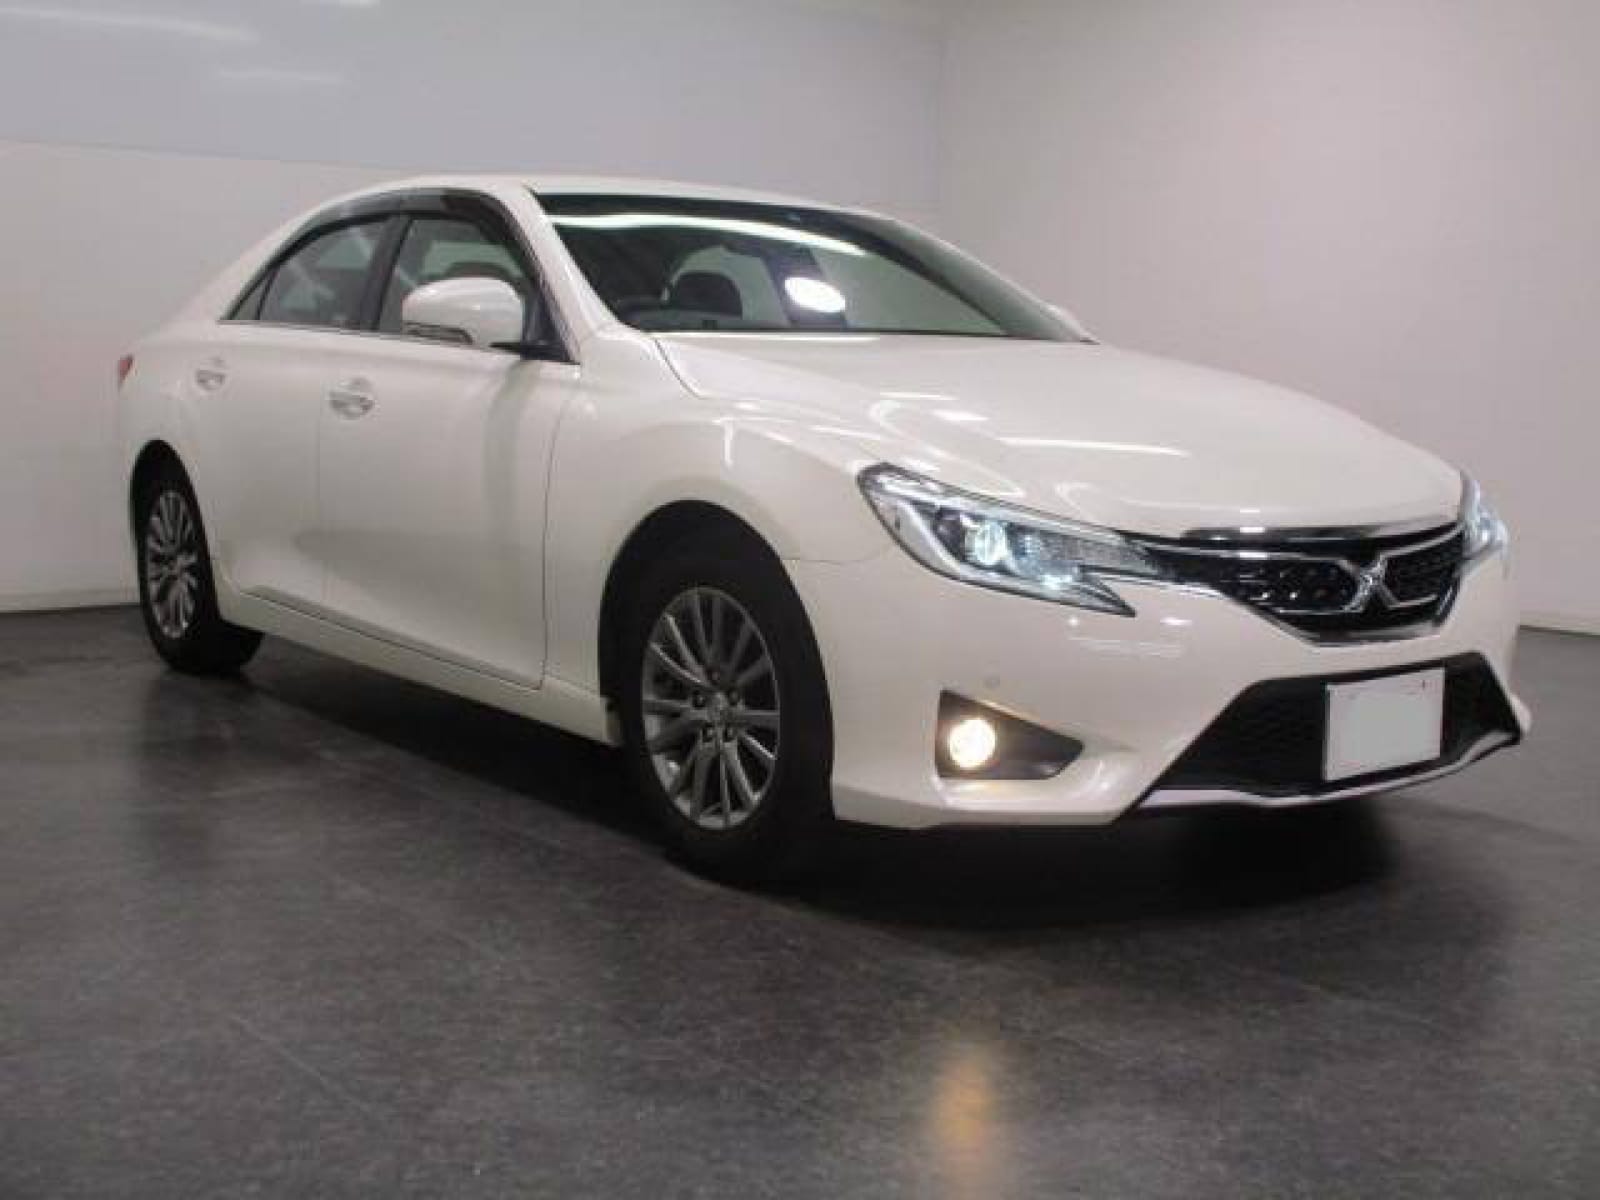 Toyota MARK X For Hire Lease Rental in Kenya Best prices all cars available